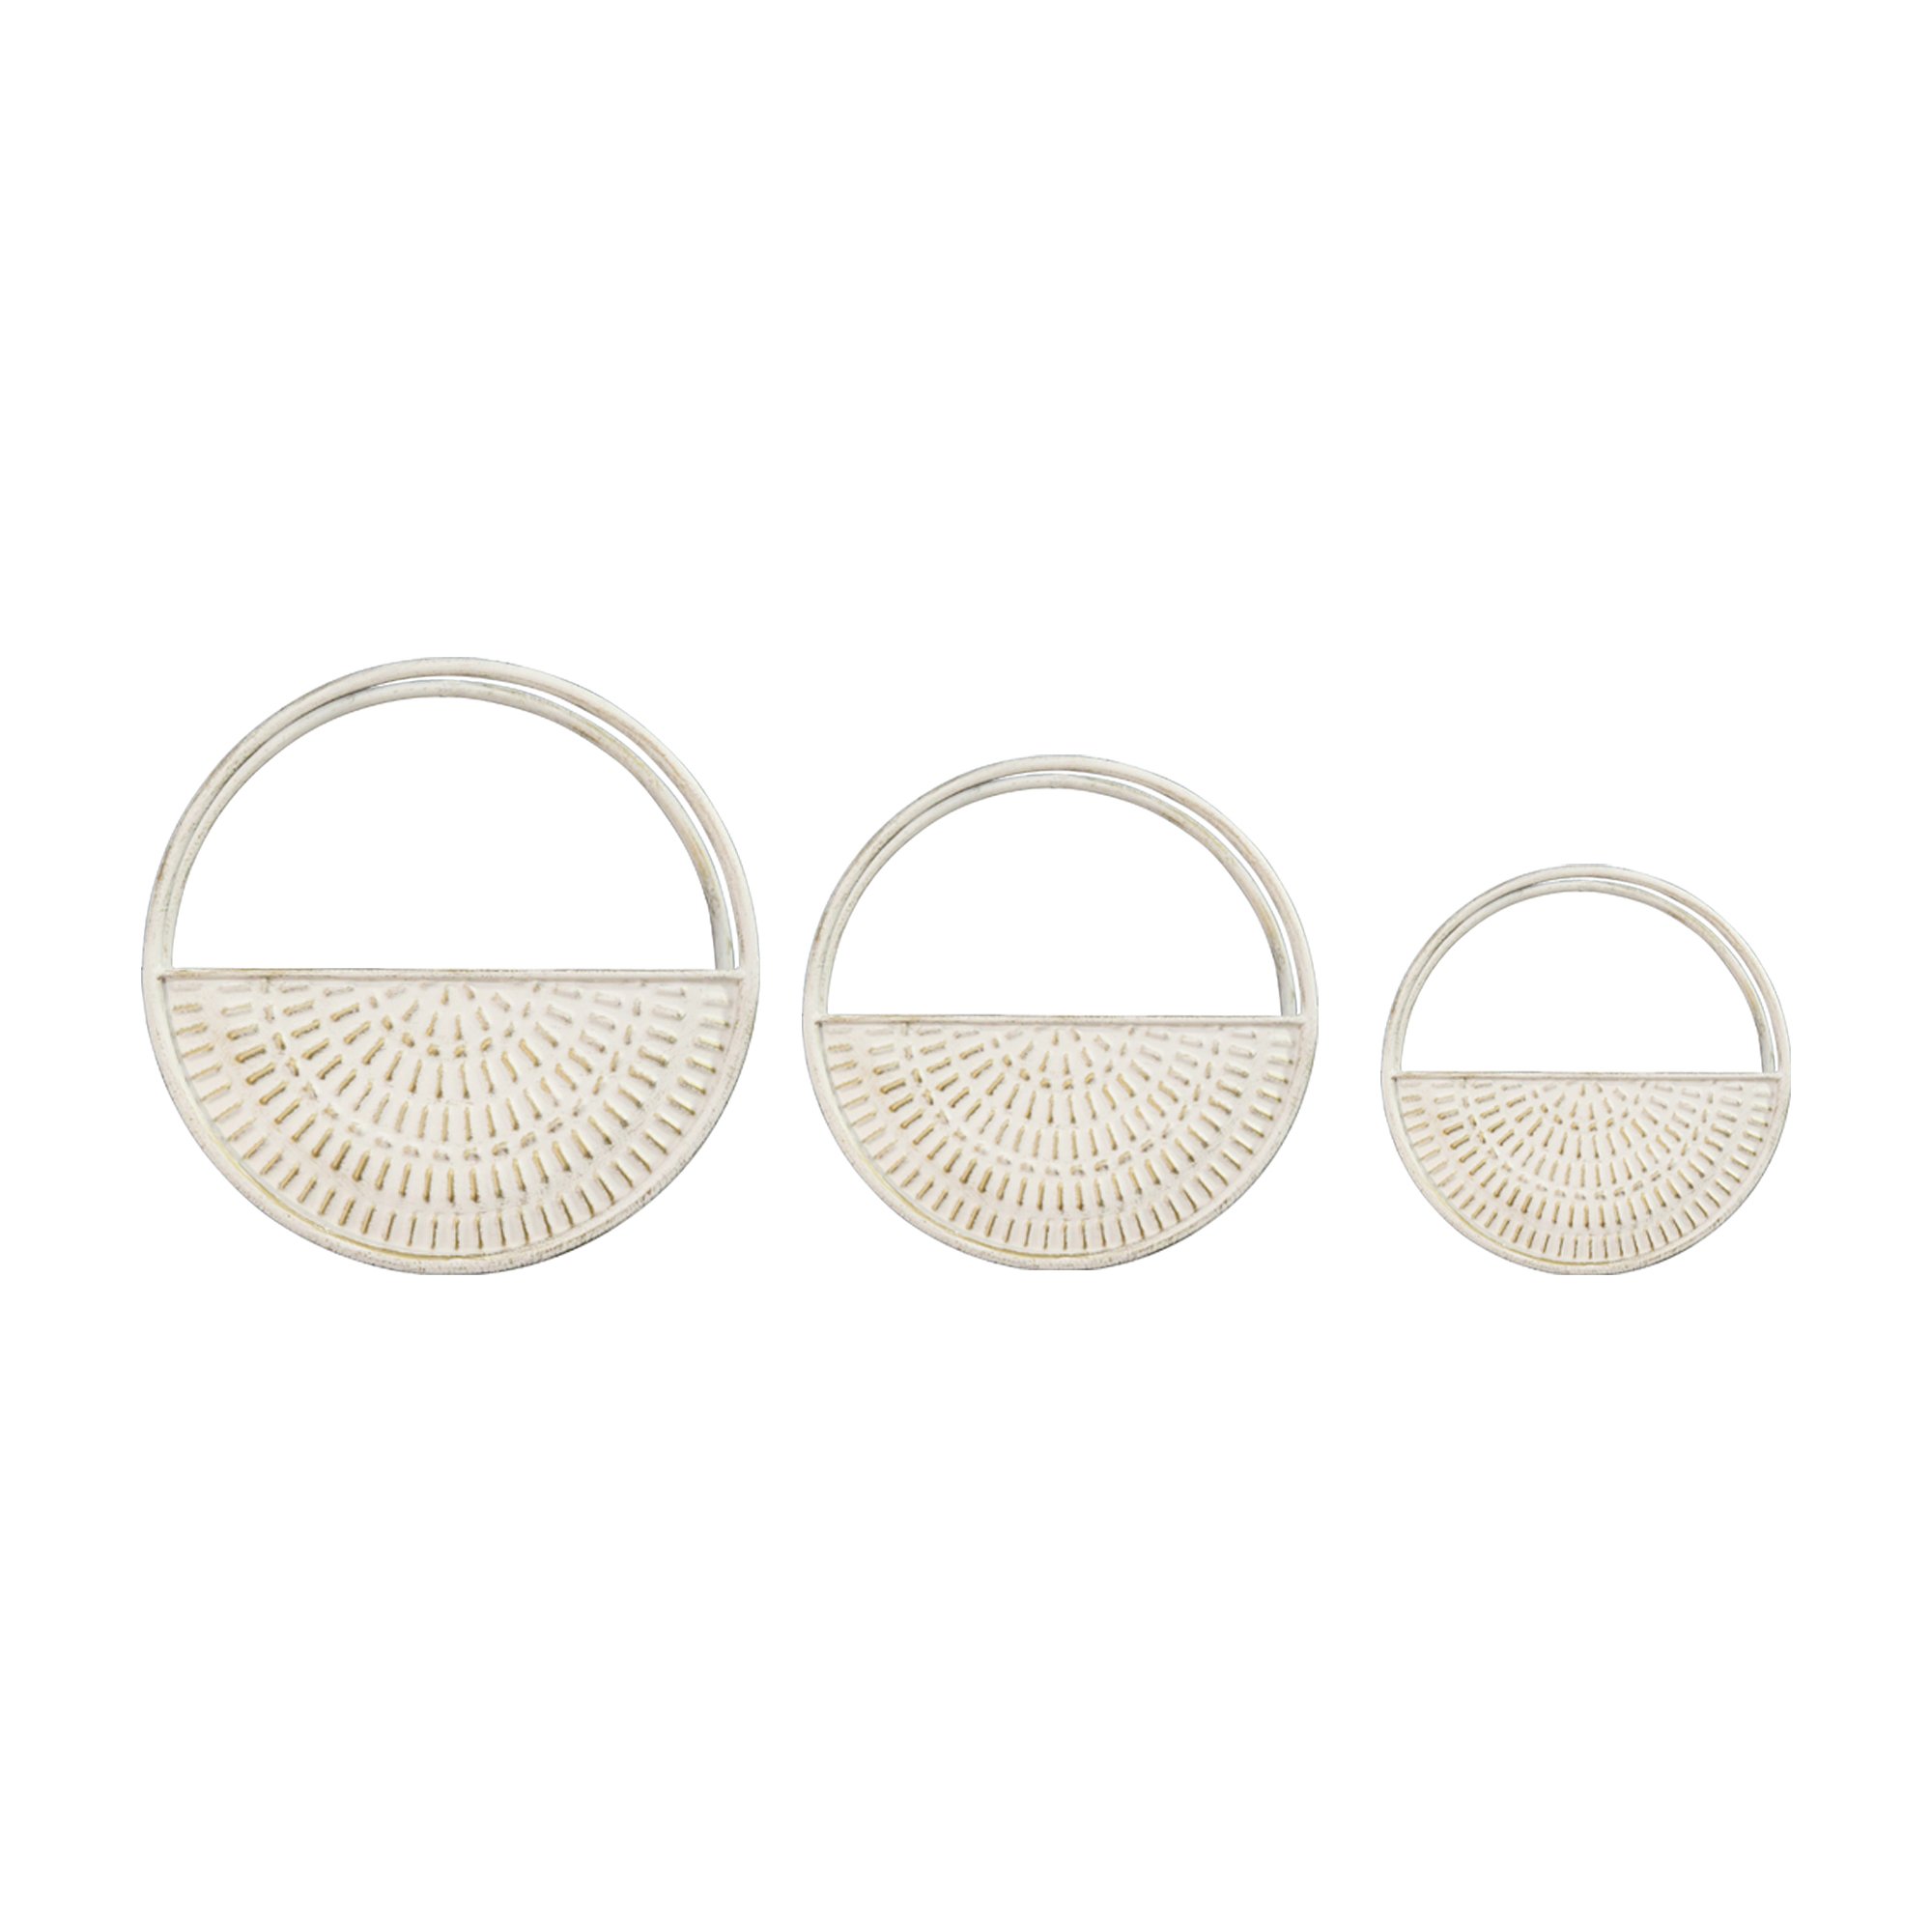 S/3 White Distressed Circle Wall Planters